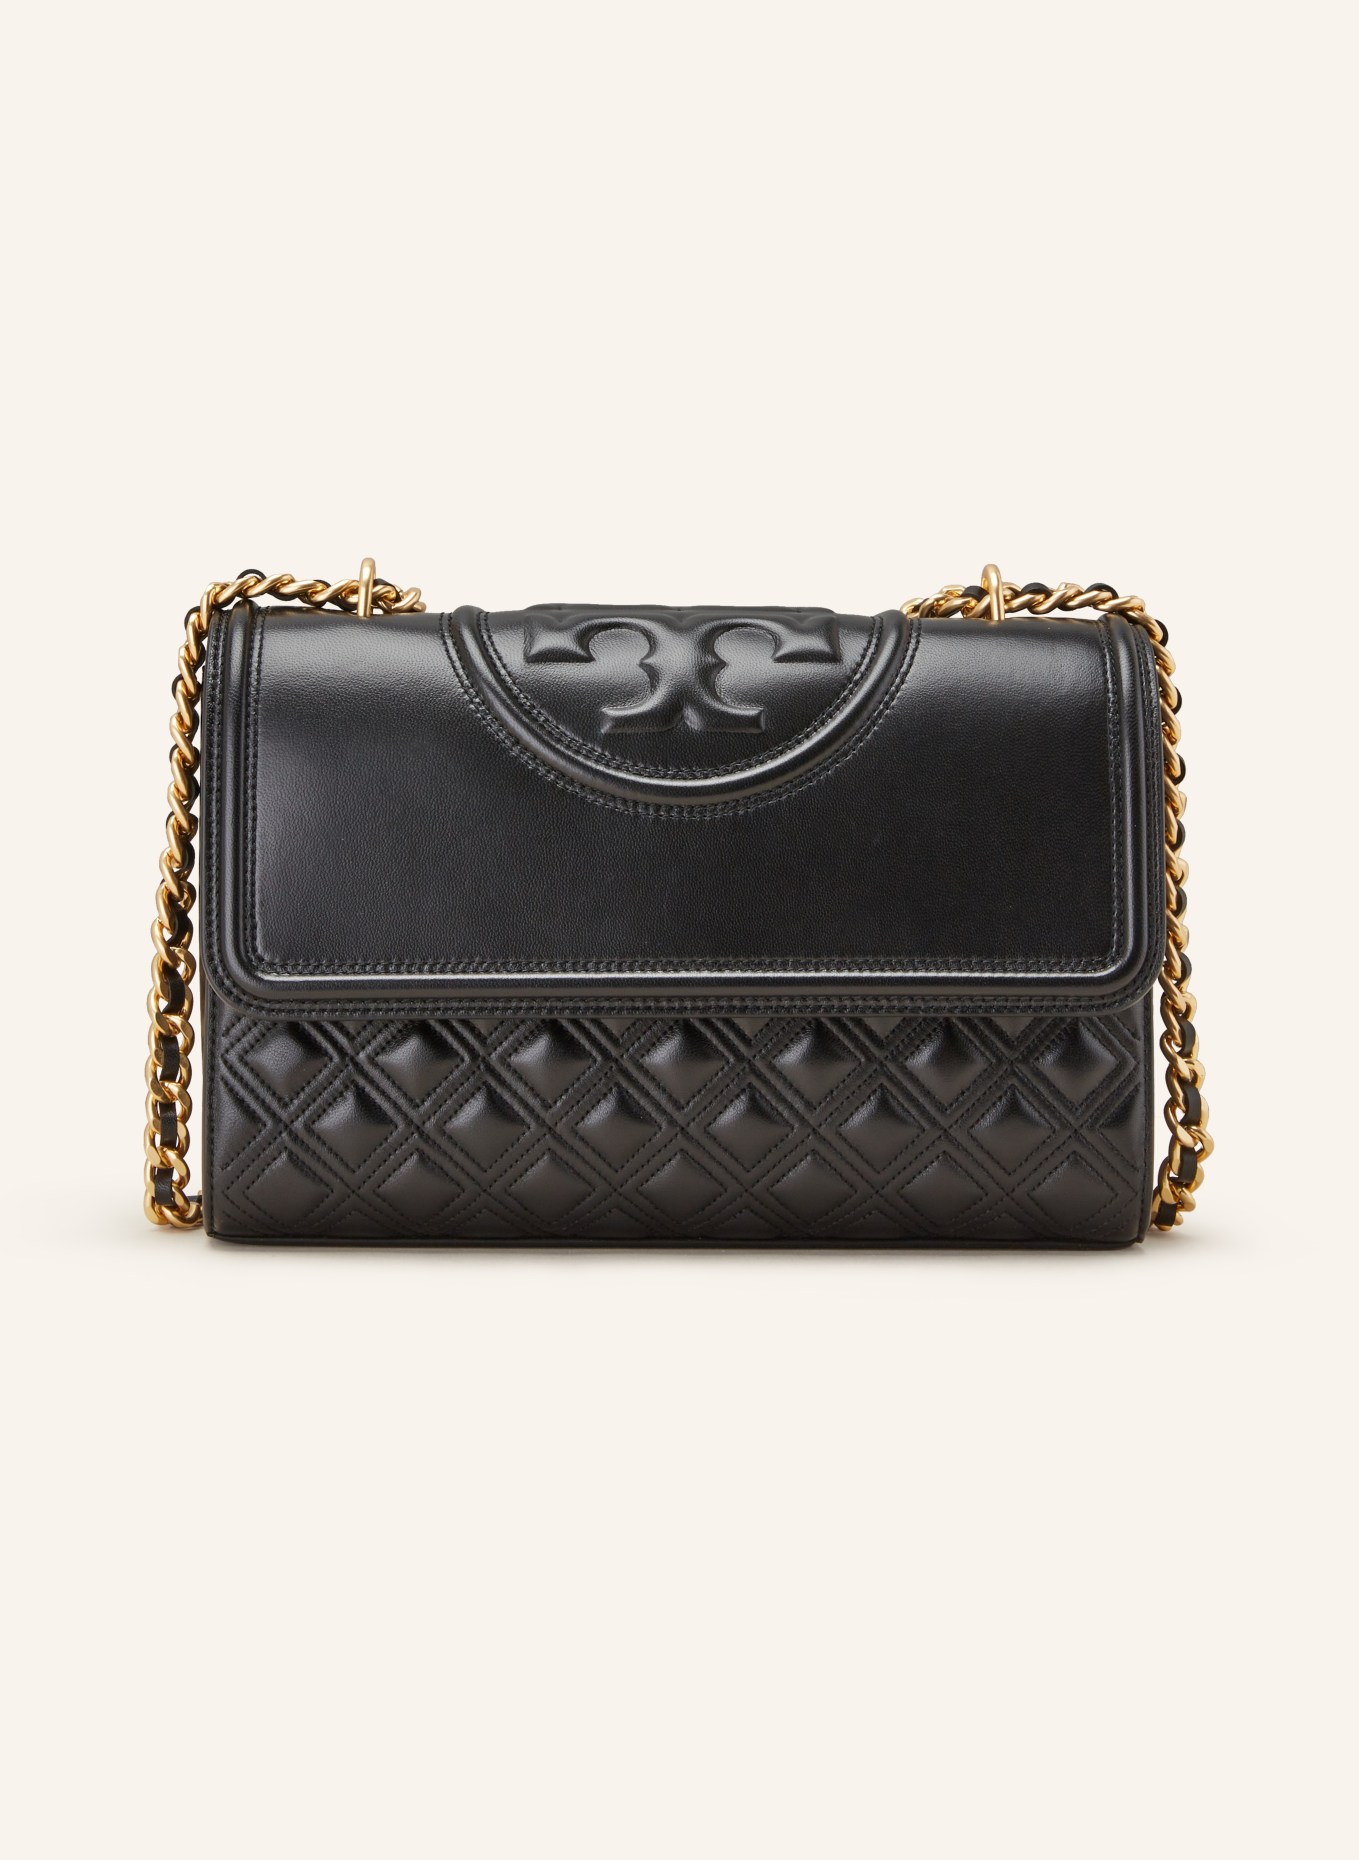 Tory Burch Small Fleming Convertible Leather Shoulder Bag | Nordstrom